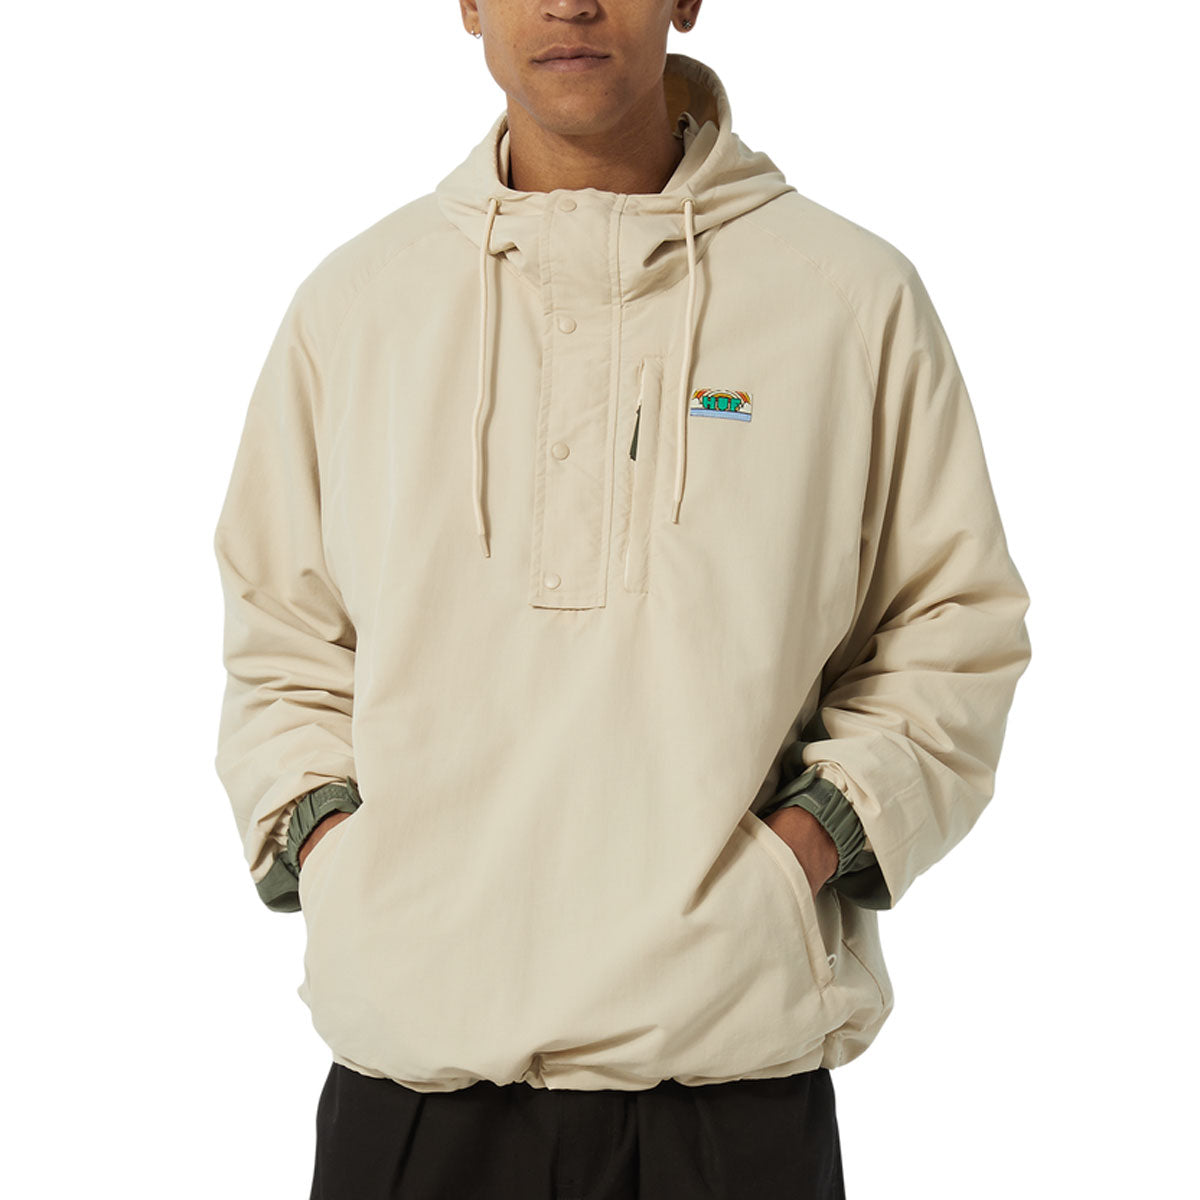 HUF New Day Packable Anorak Jacket - Cream image 1